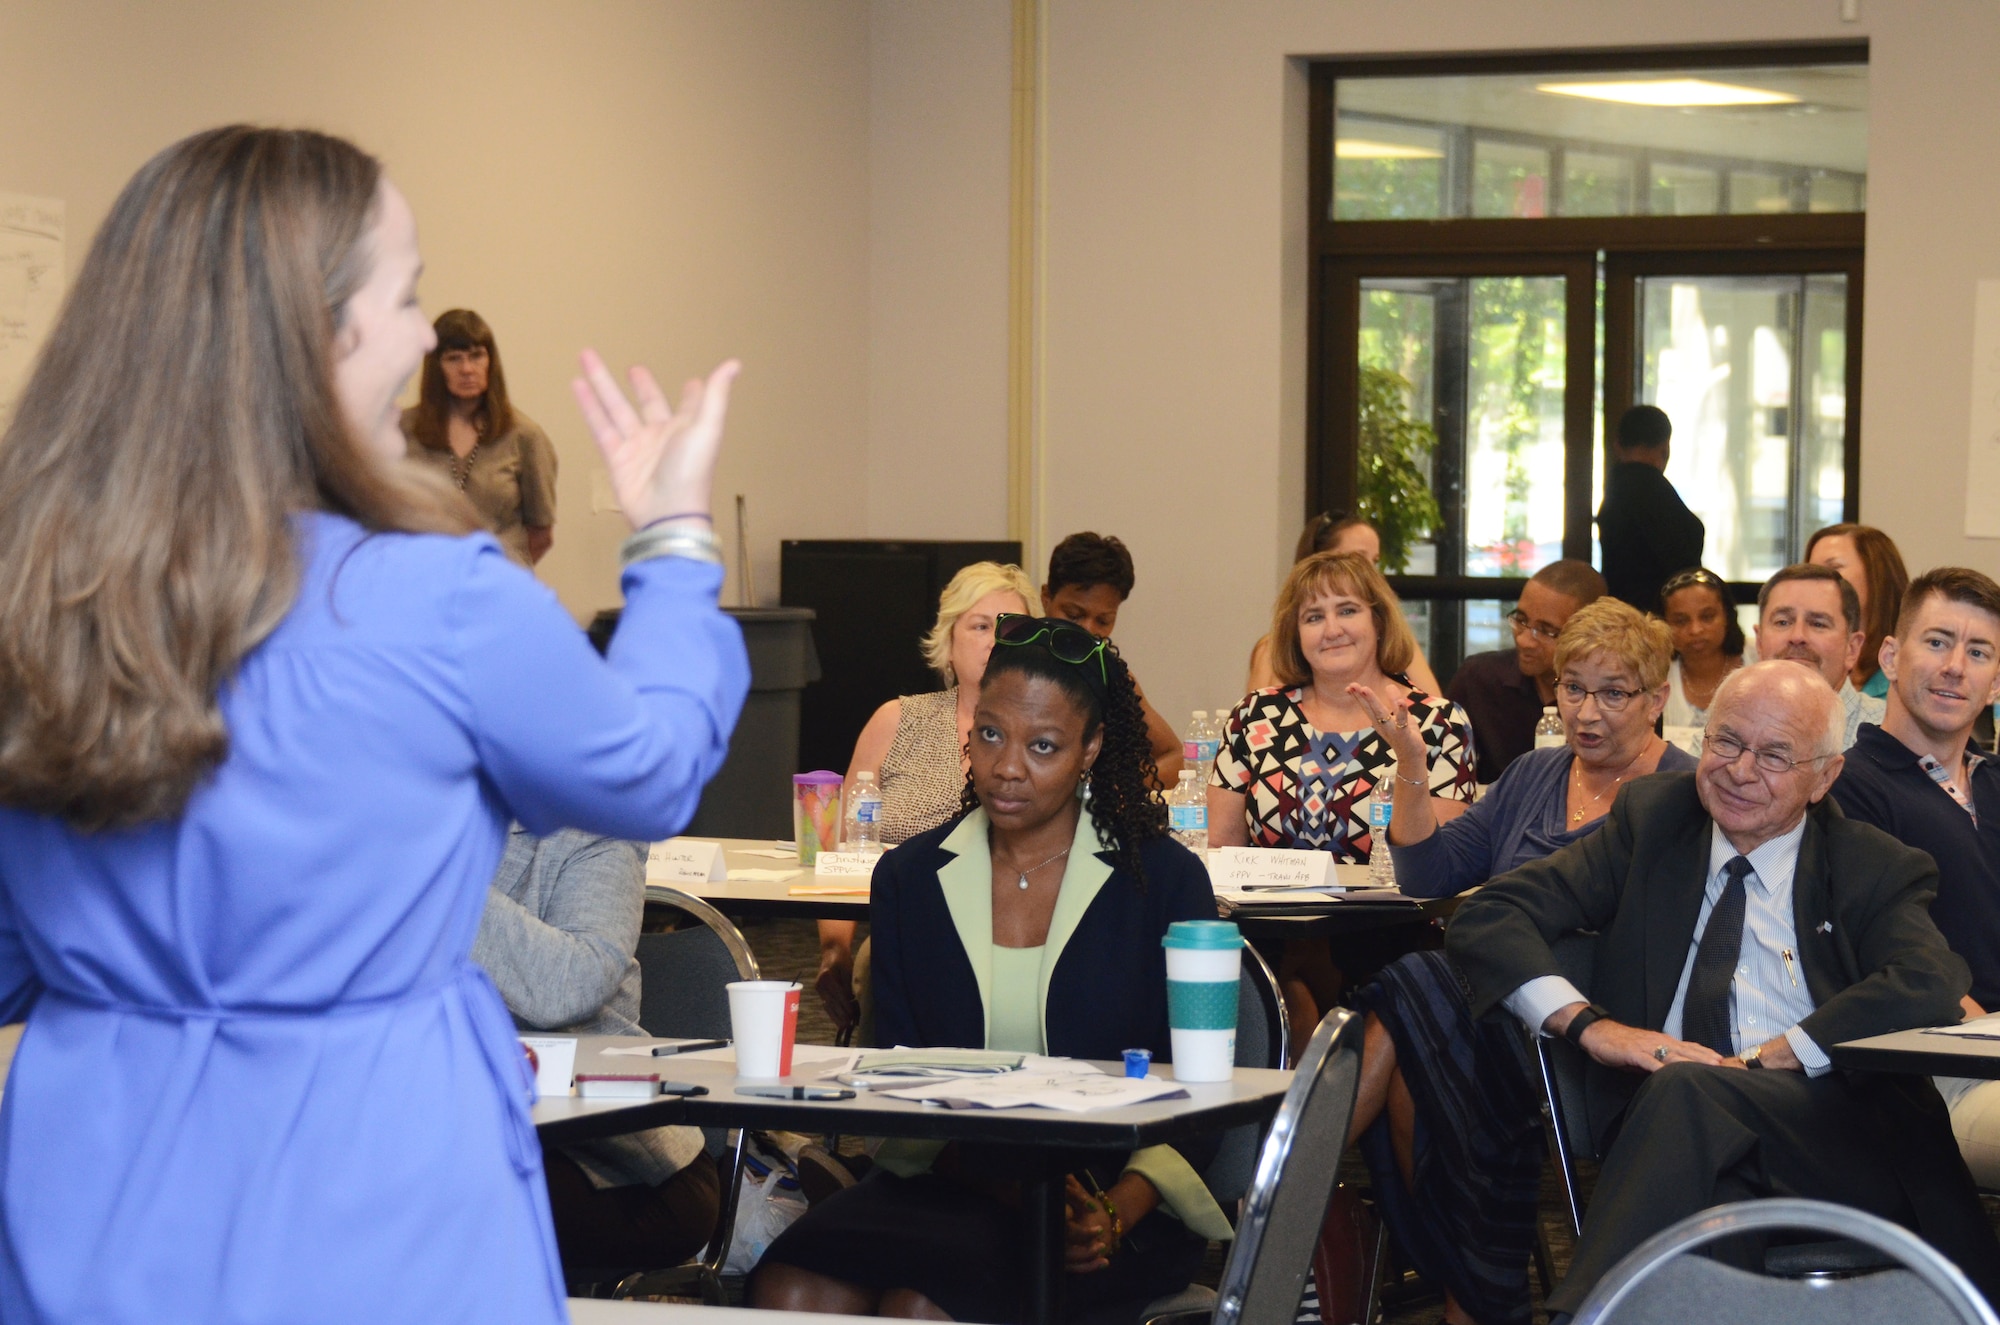 Laura Chiang from the Center for Disease Control and prevention, interacts with a group of participants during a discussion on barriers to effective prevention at the Primary Prevention of Violence Foundation Training seminar held on Dobbins Air Reserve Base, Ga. July 19, 2016. The 10-day training program held 18-29 July, involved guest speakers from Headquarters Air Force, CDC and Green Dot. (U.S. Air Force photo/Don Peek)